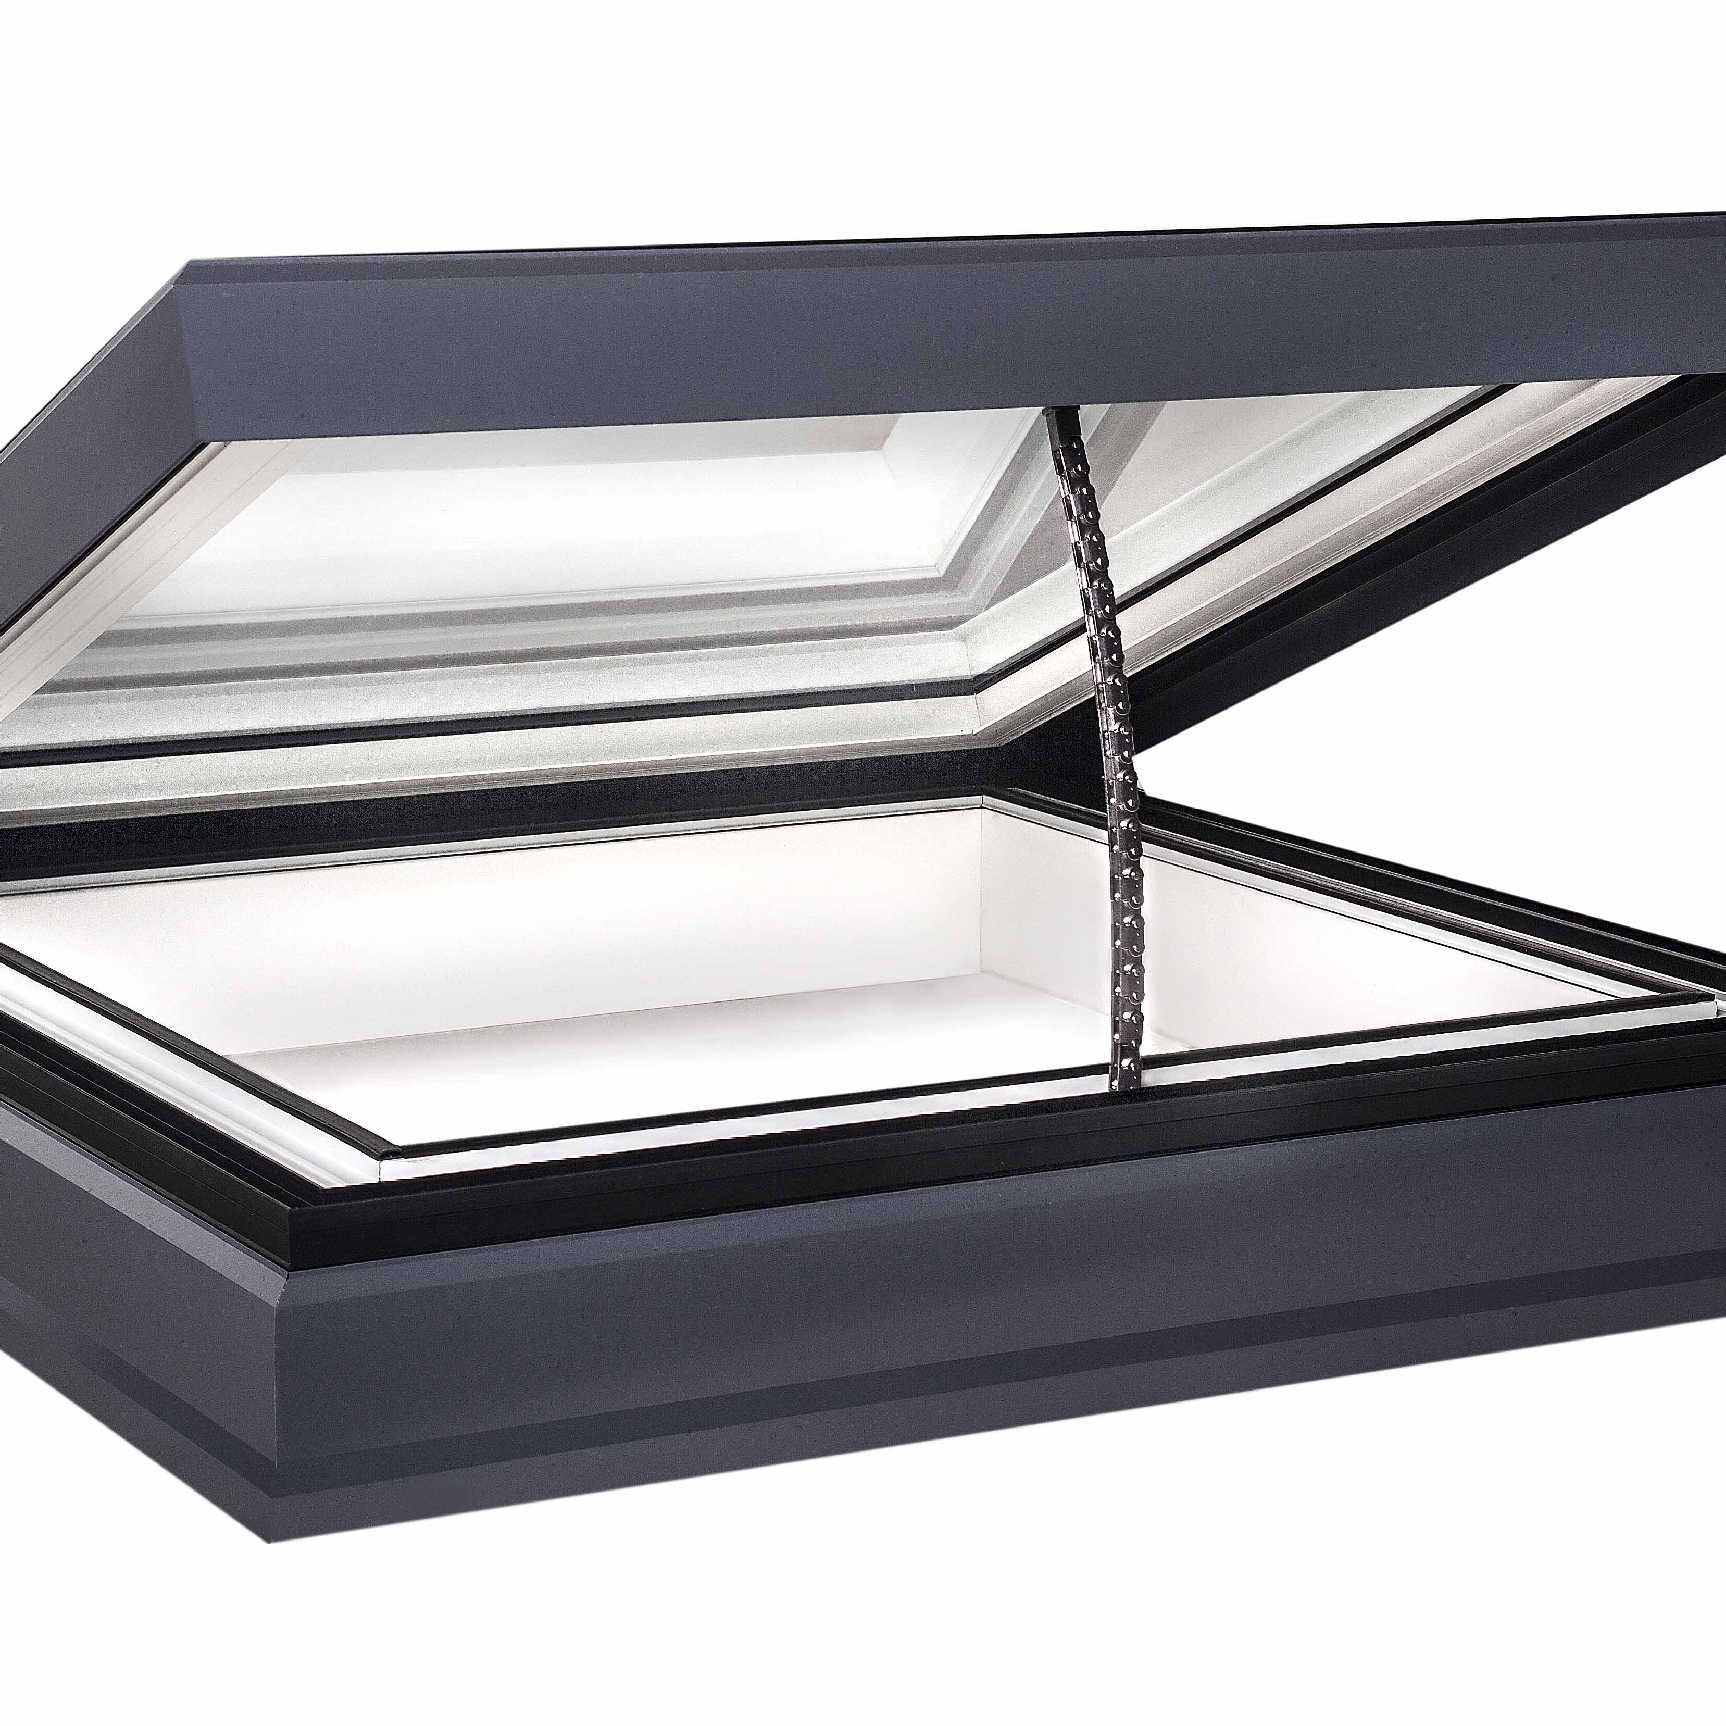 Affordable EcoGard Flat Roof light, Double Glazed, Electric Opening, 1,000mm x 1,000mm